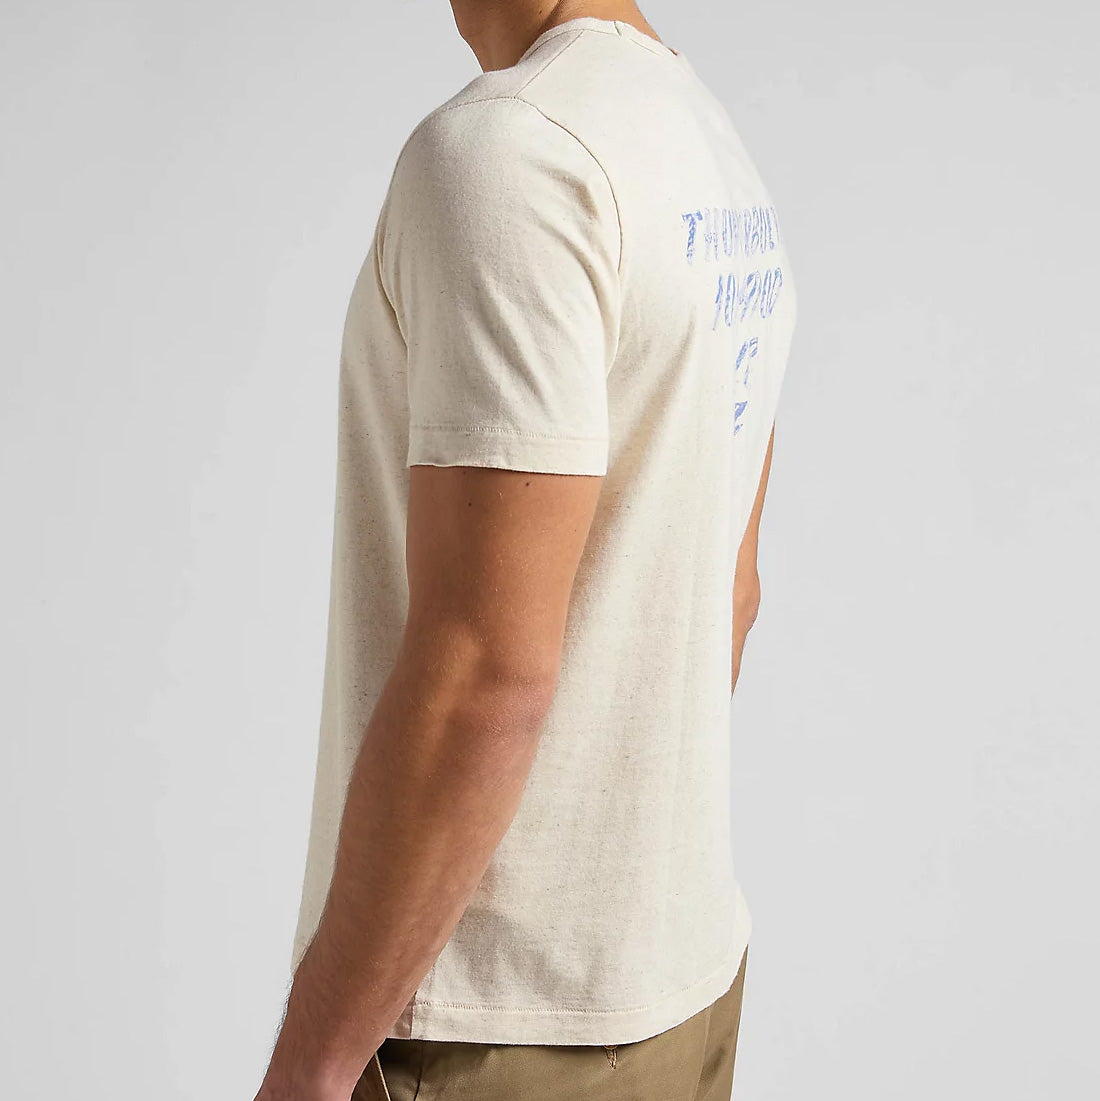 Lee 101 Graphic Tee in Raw